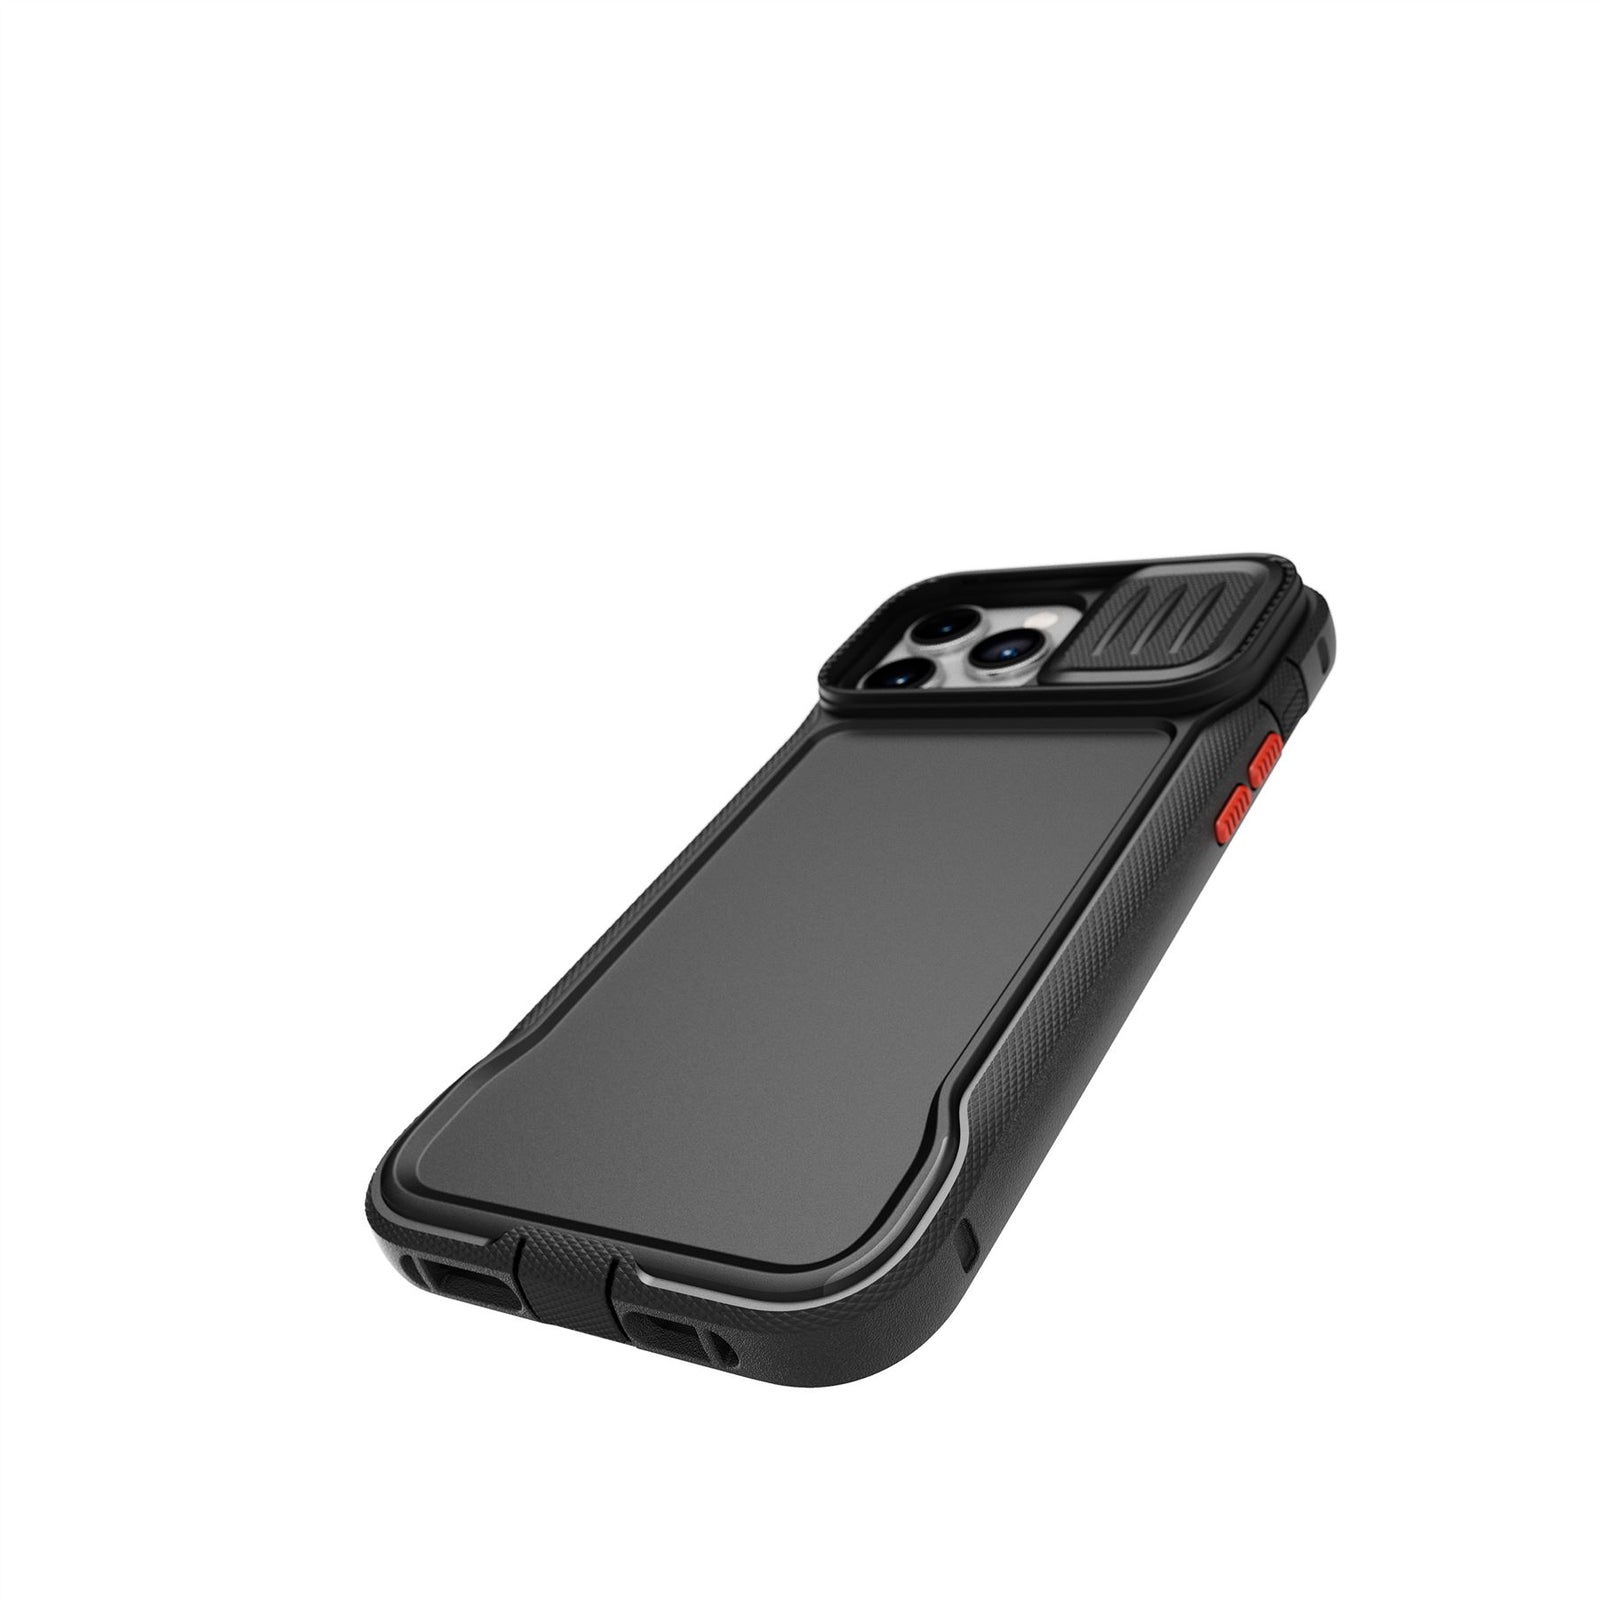 Evo Max - Apple iPhone 13 Pro Max Case with Holster - Off Black